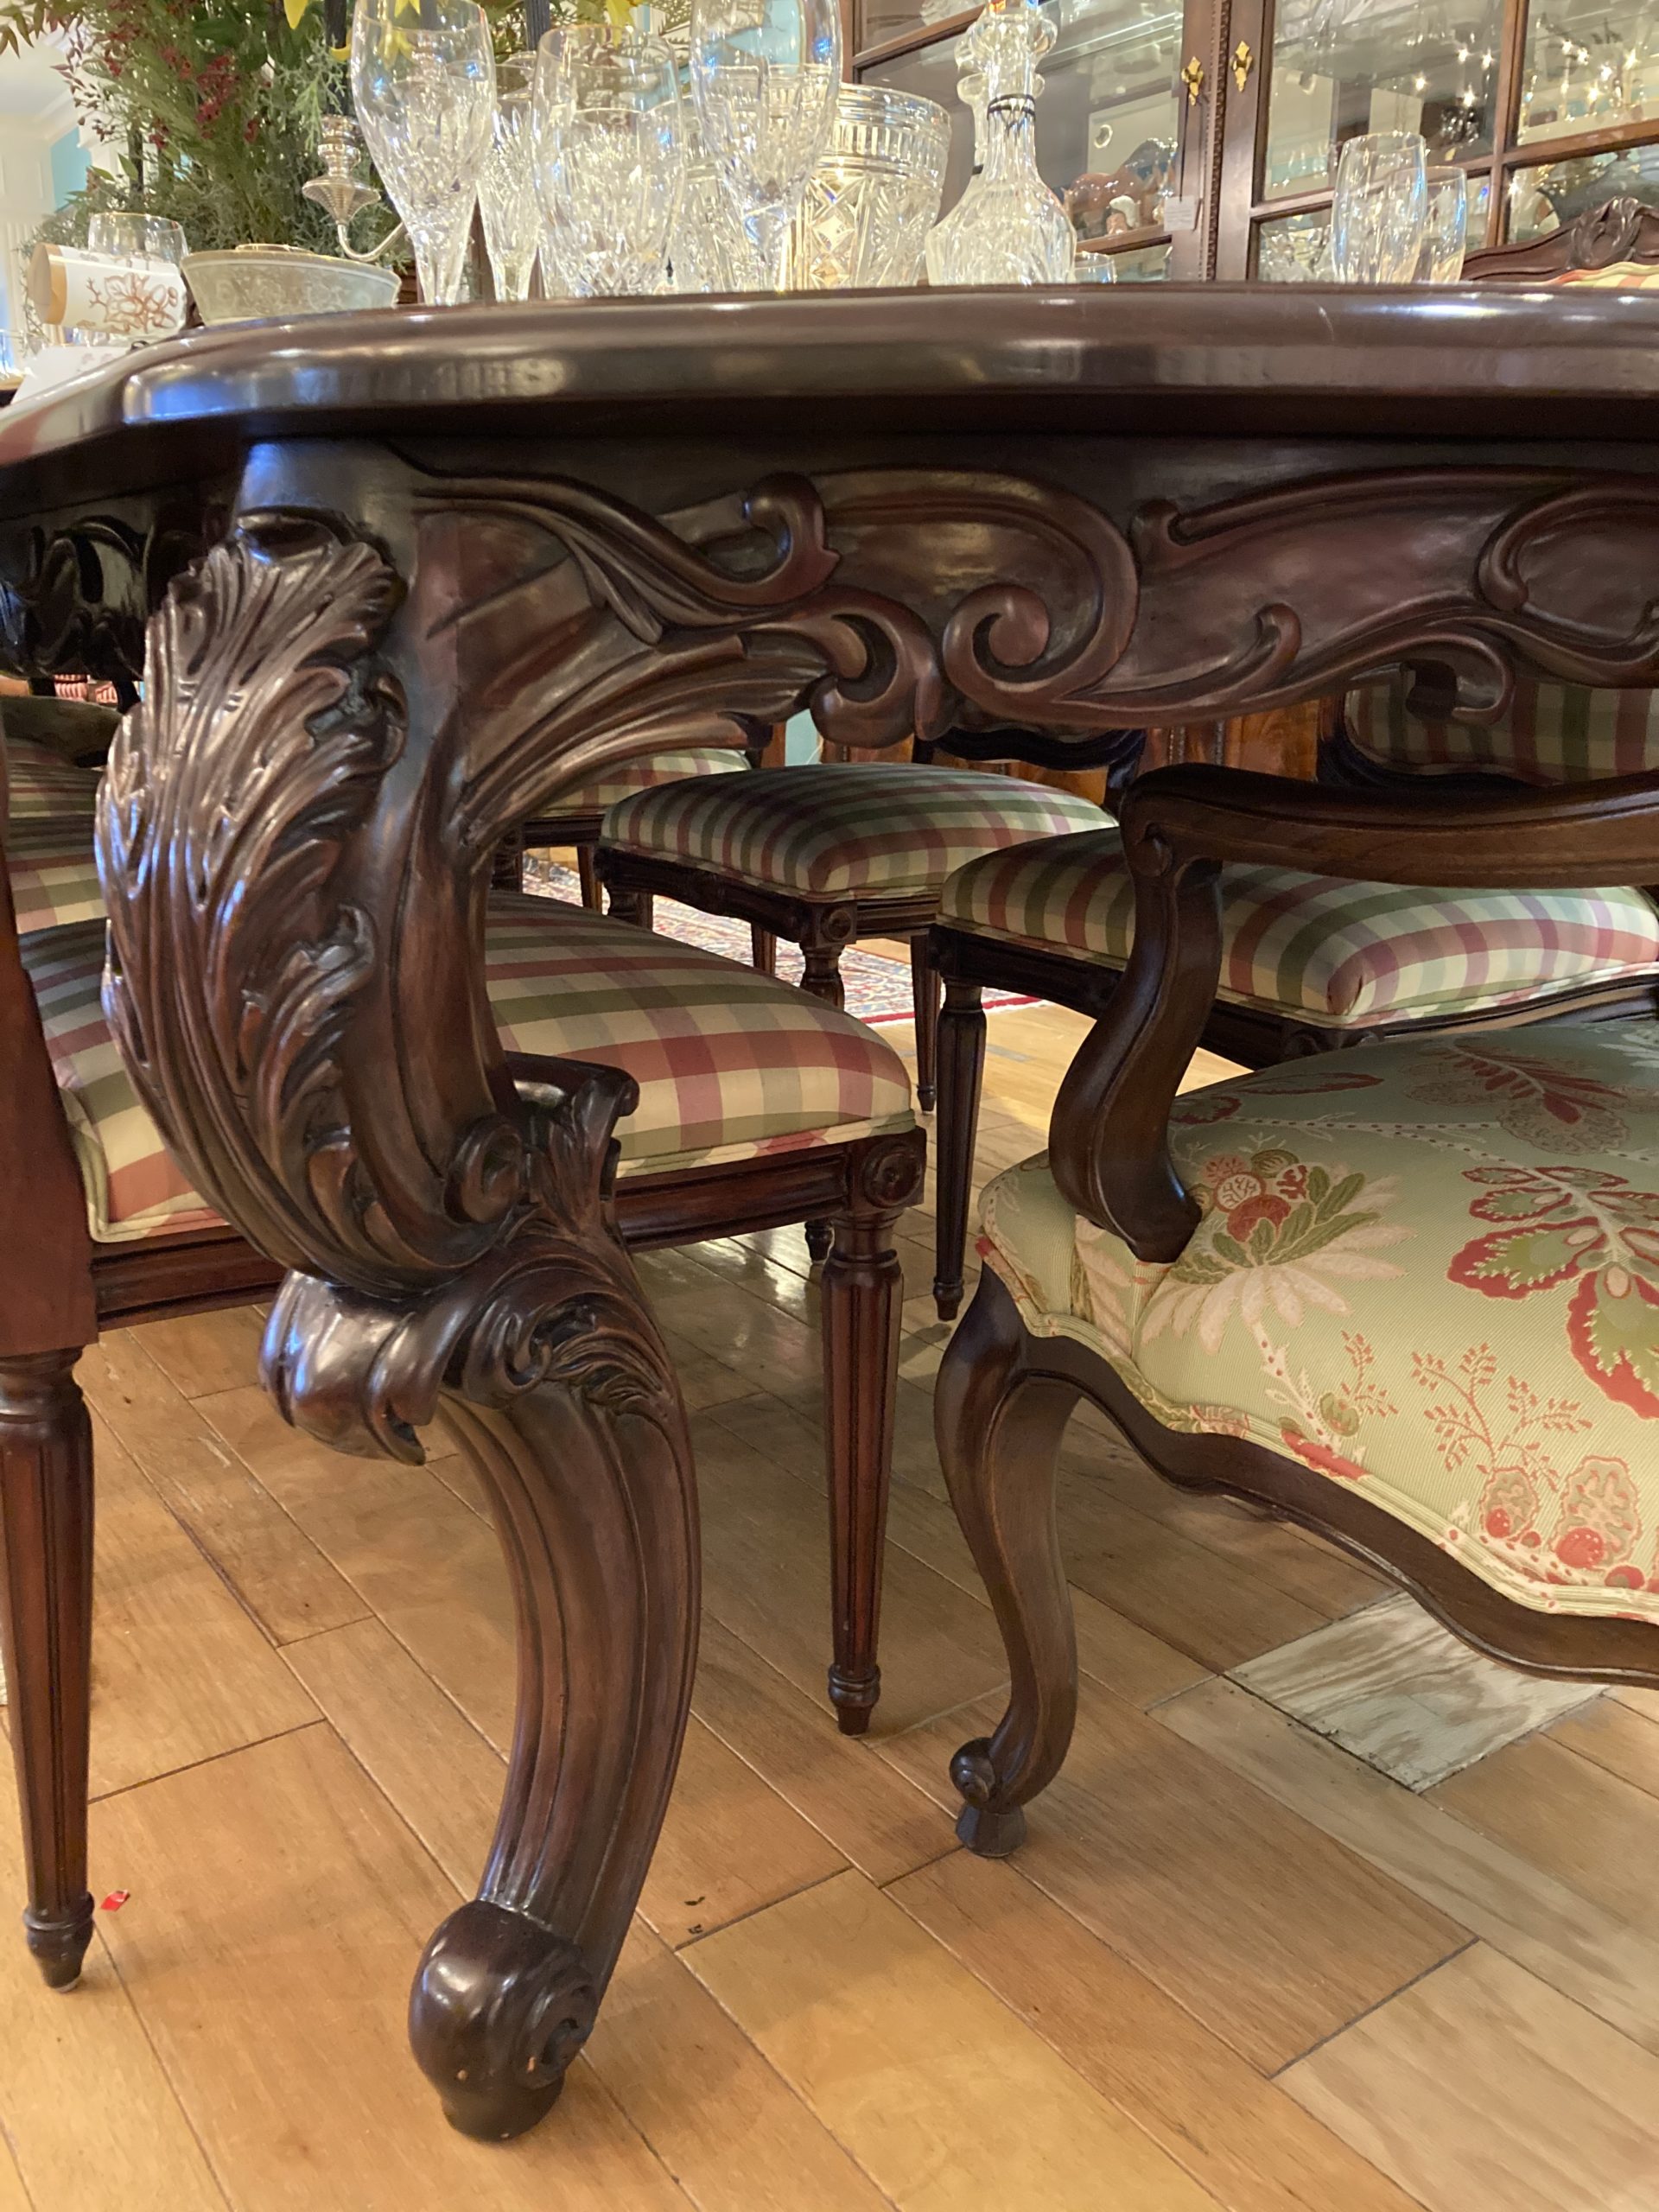 Formal Dining Table with Cabriole Legs - Ark Antiques, La Jolla, CA